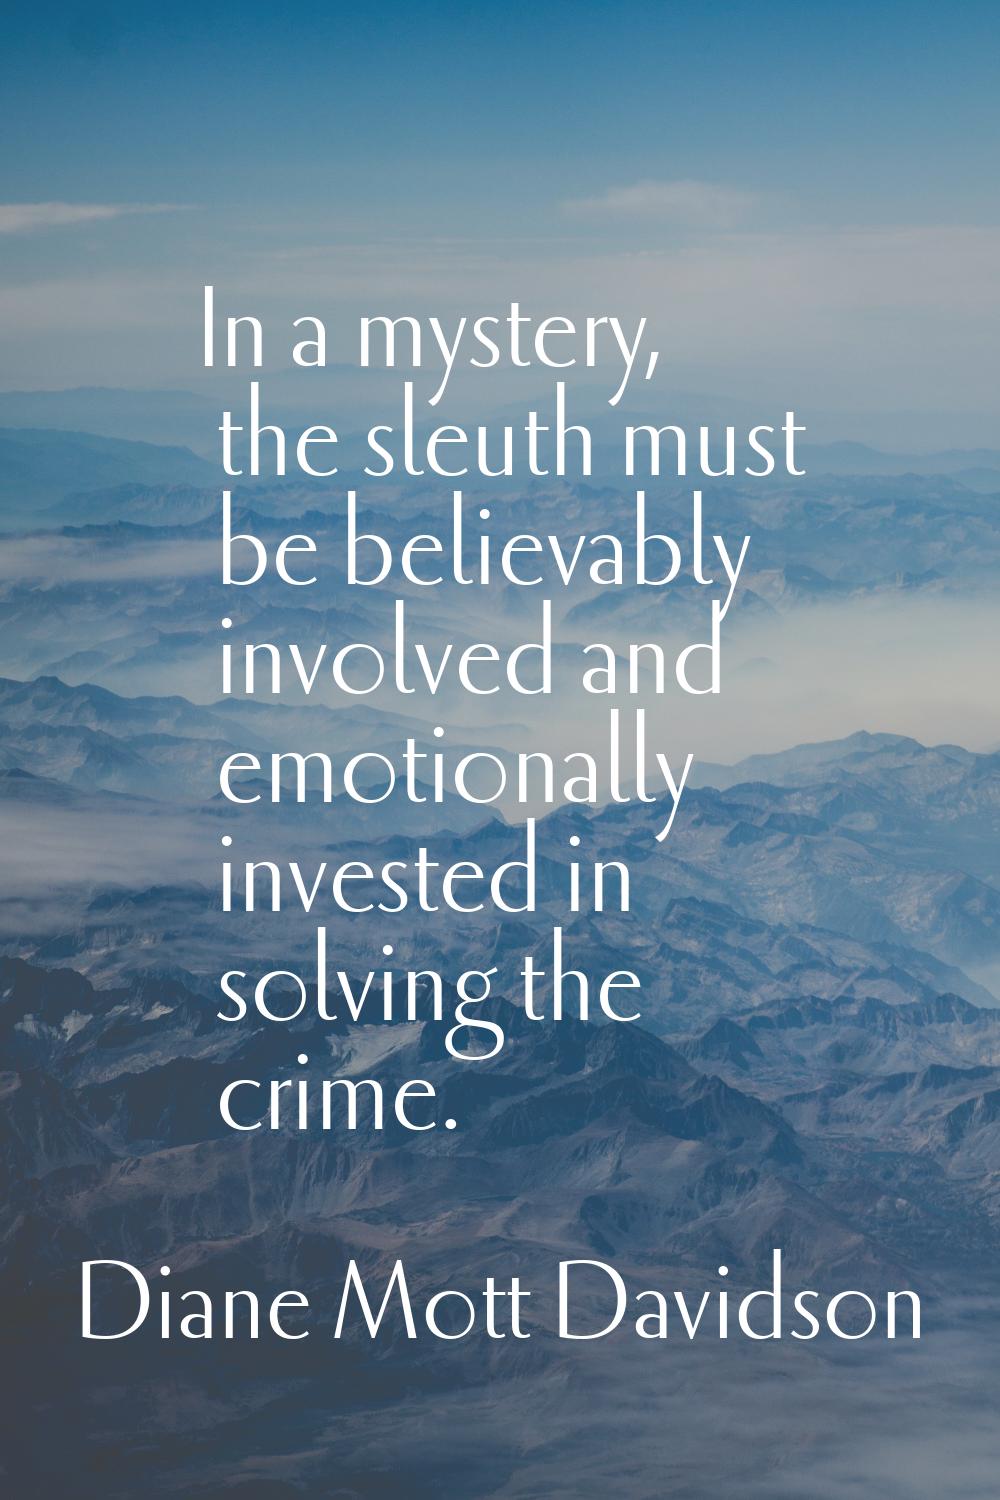 In a mystery, the sleuth must be believably involved and emotionally invested in solving the crime.